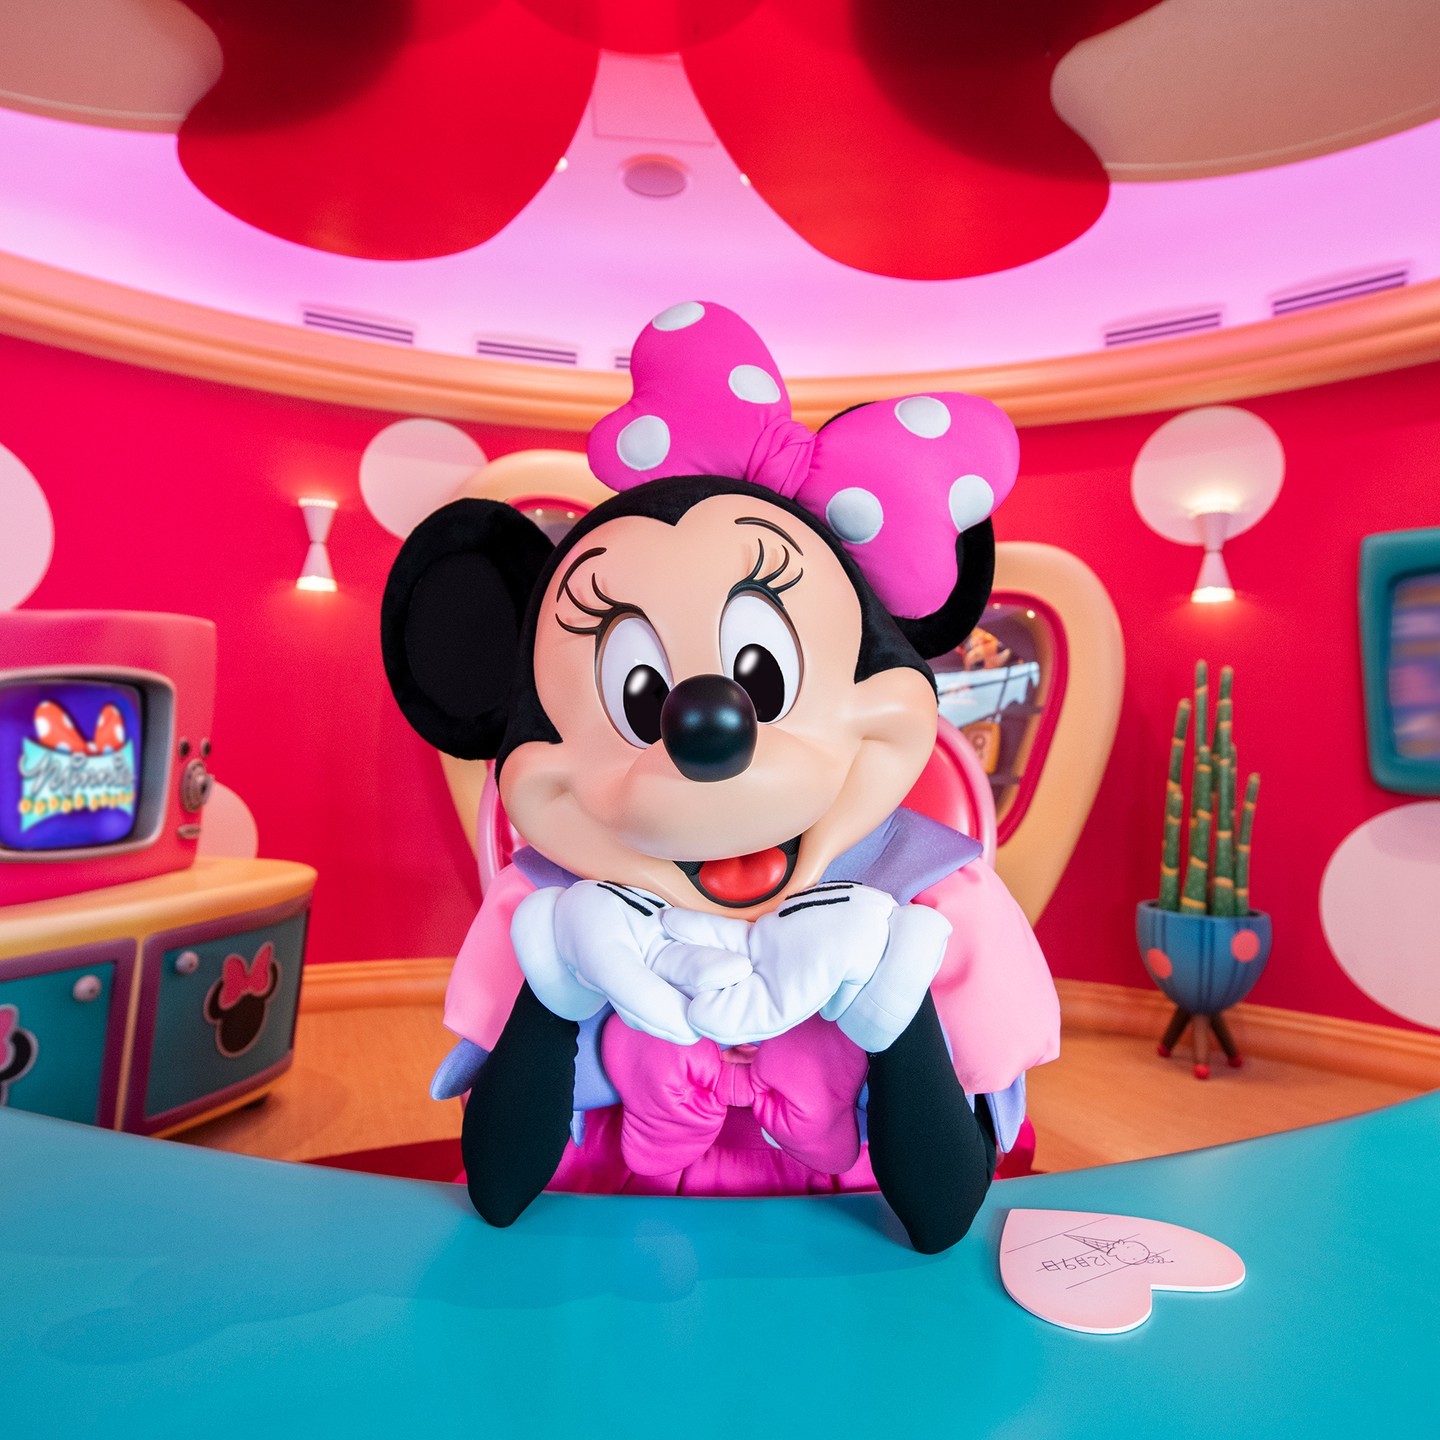 Minnie is always ready for her closeup!
そんなに見つめられると照れちゃうね❤️
#minniemouse... 이미지